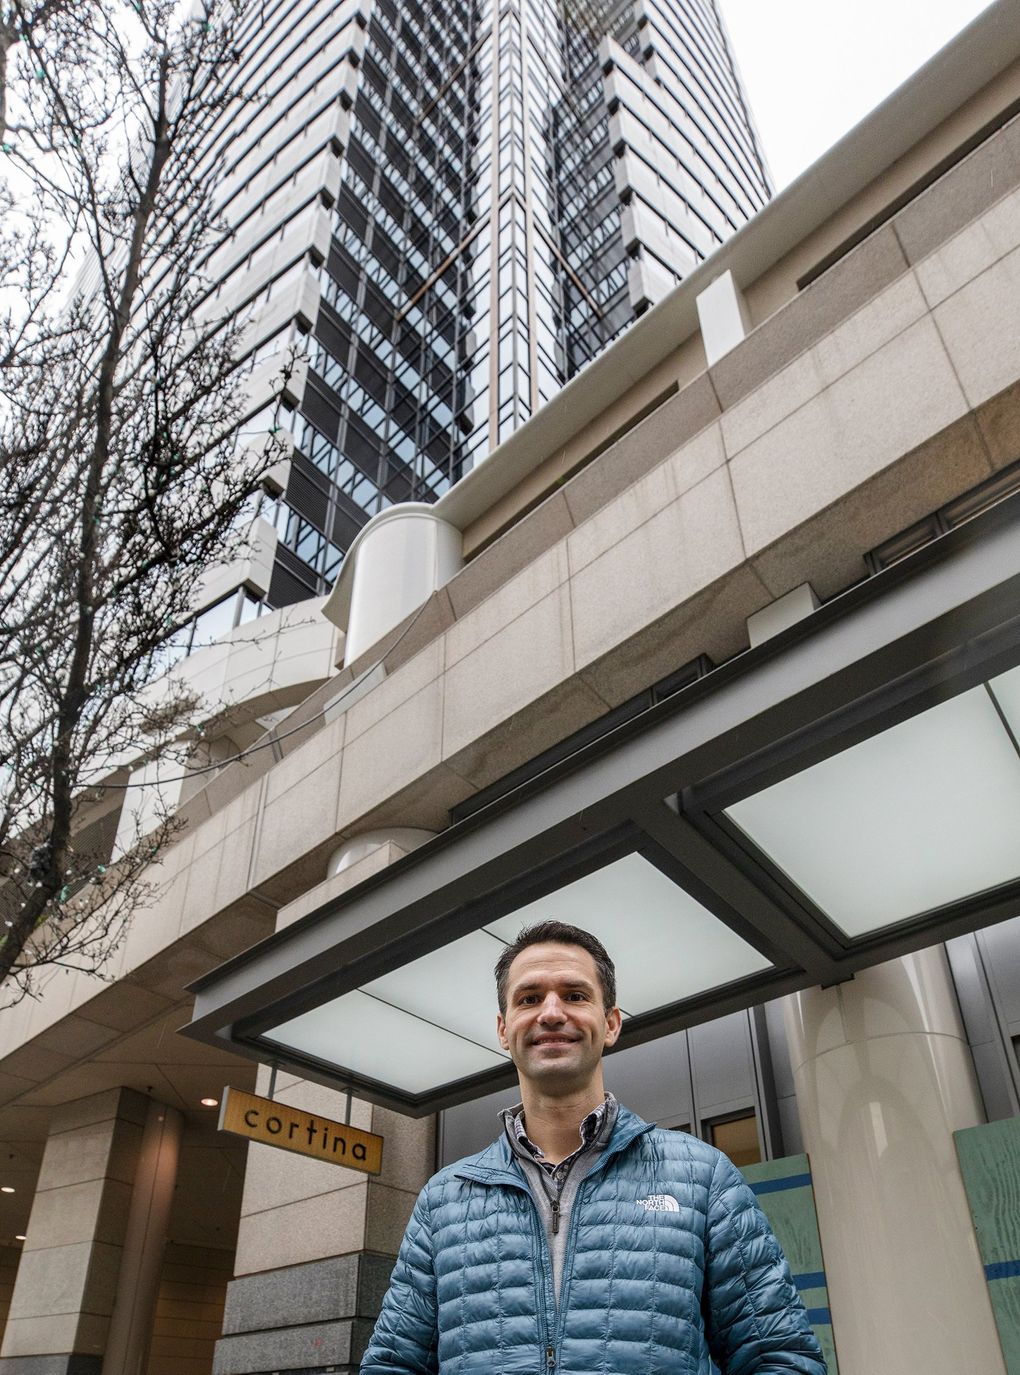 With the prospect of fewer workers downtown, Steve Hooper Jr. – oustide the Cortina Cafe – says he expects fewer restaurateurs or other businesses to gamble on downtown. (Steve Ringman / The Seattle Times)